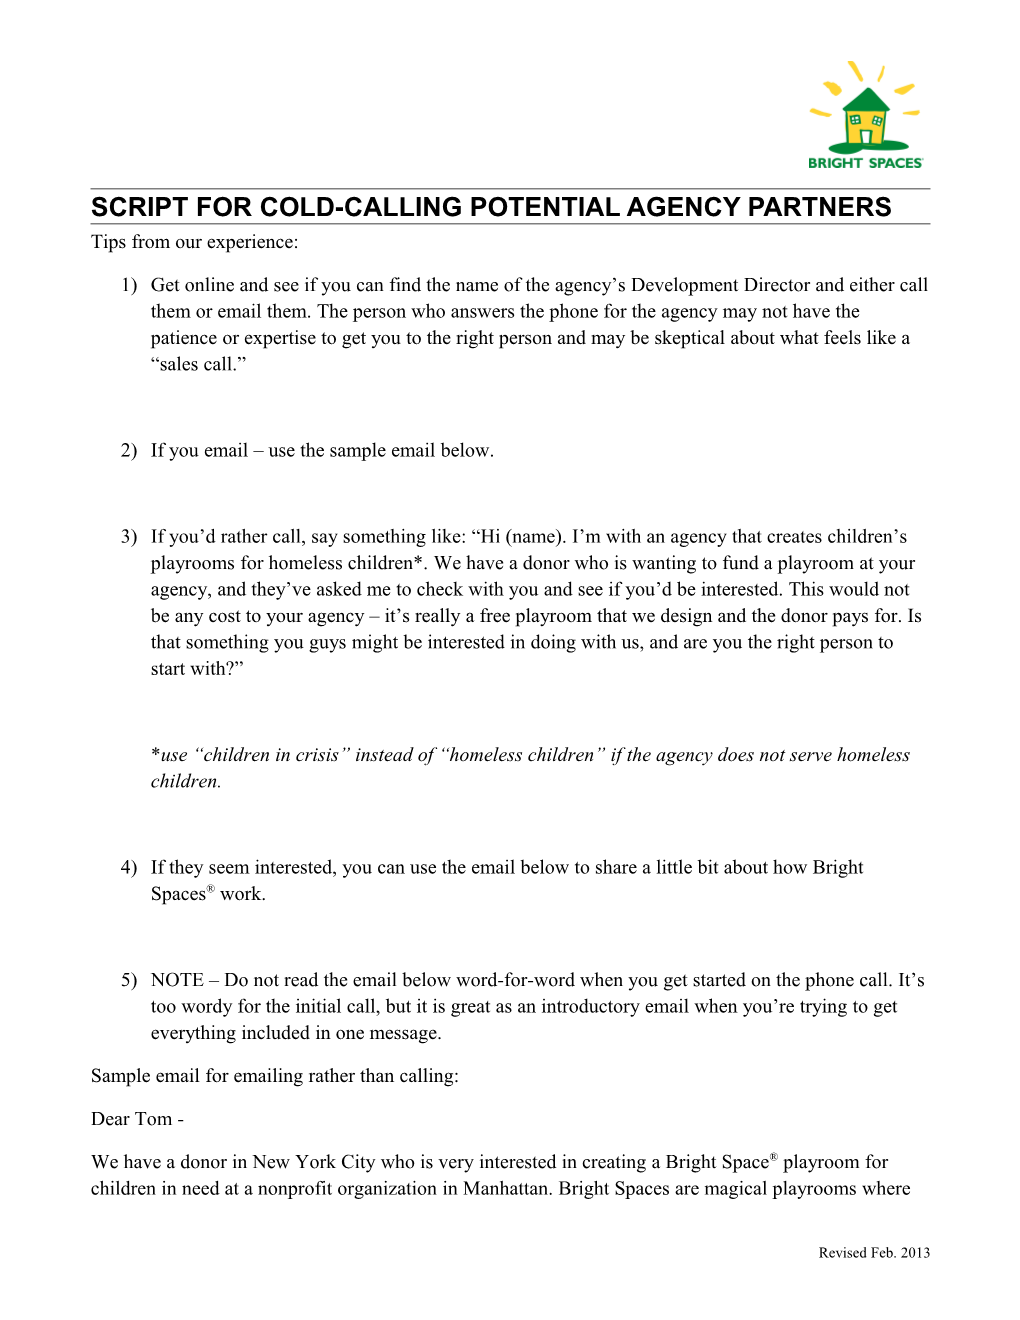 Script for Cold-Calling Potential Agency Partners